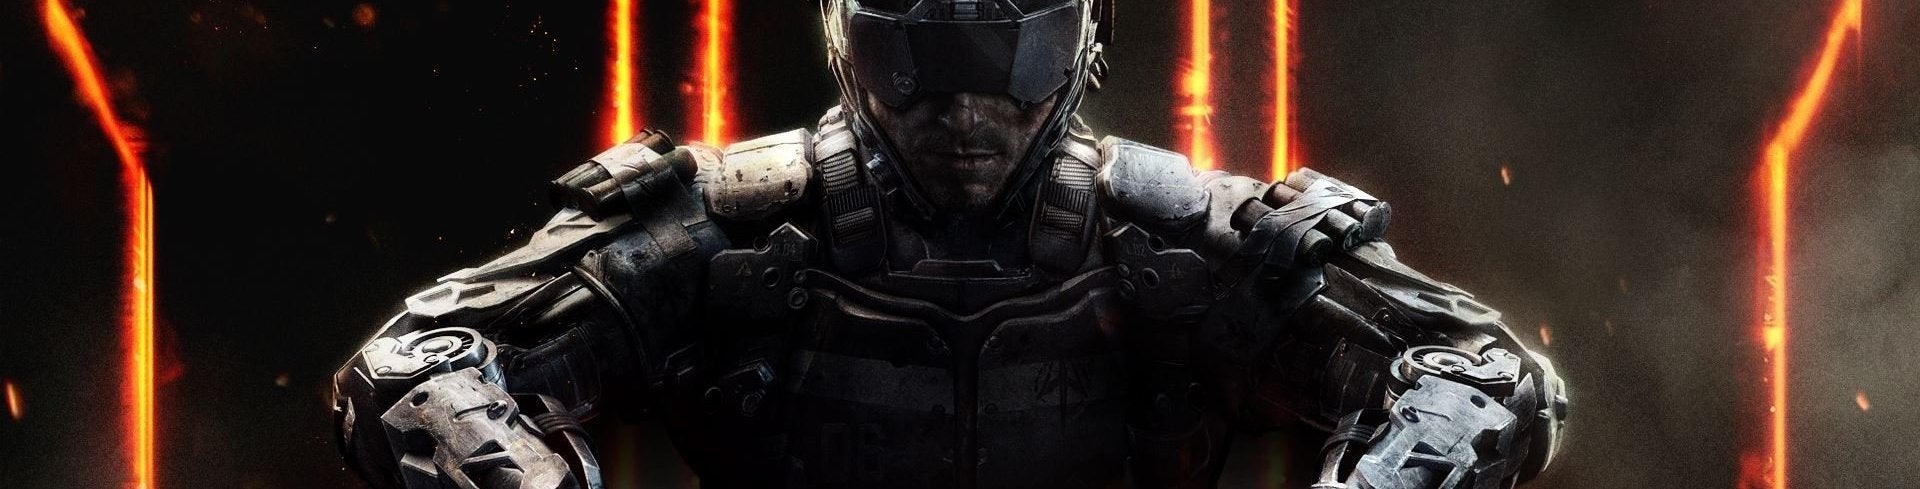 Image for RECENZE Call of Duty: Black Ops 3